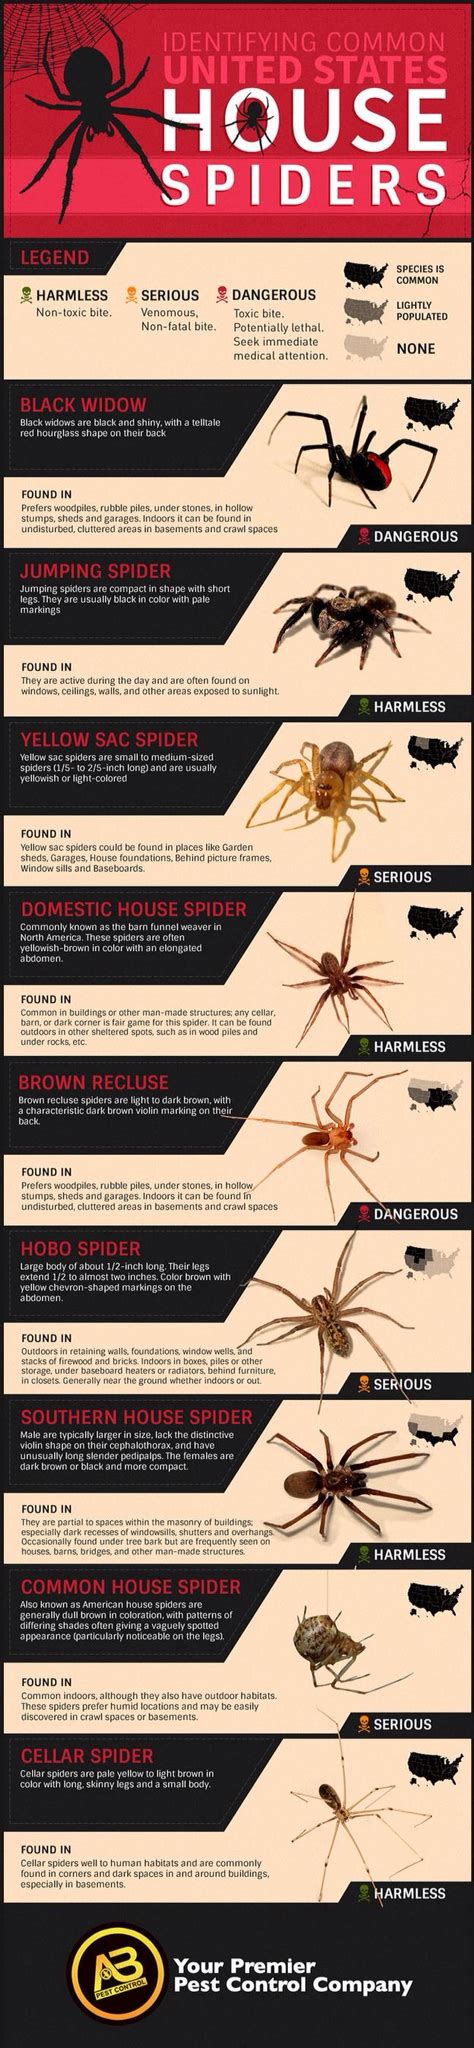 Pin By Stuff Bosquez On Things You Must Know House Spider Poisonous